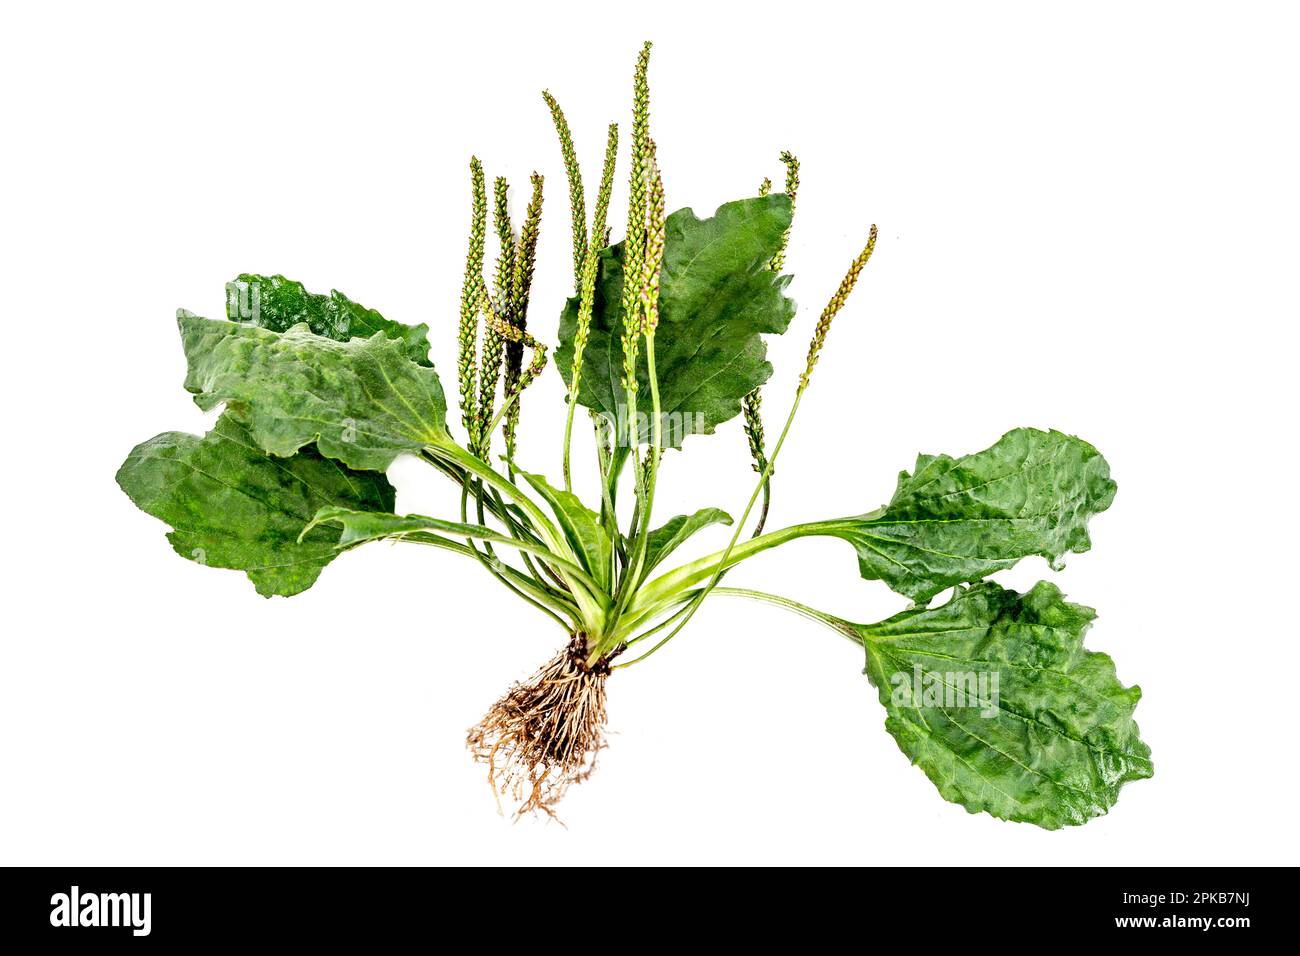 Large plantain (plantago major, plantago lanceolata) whole plant with leaves, seeds and roots, on white background. Stock Photo